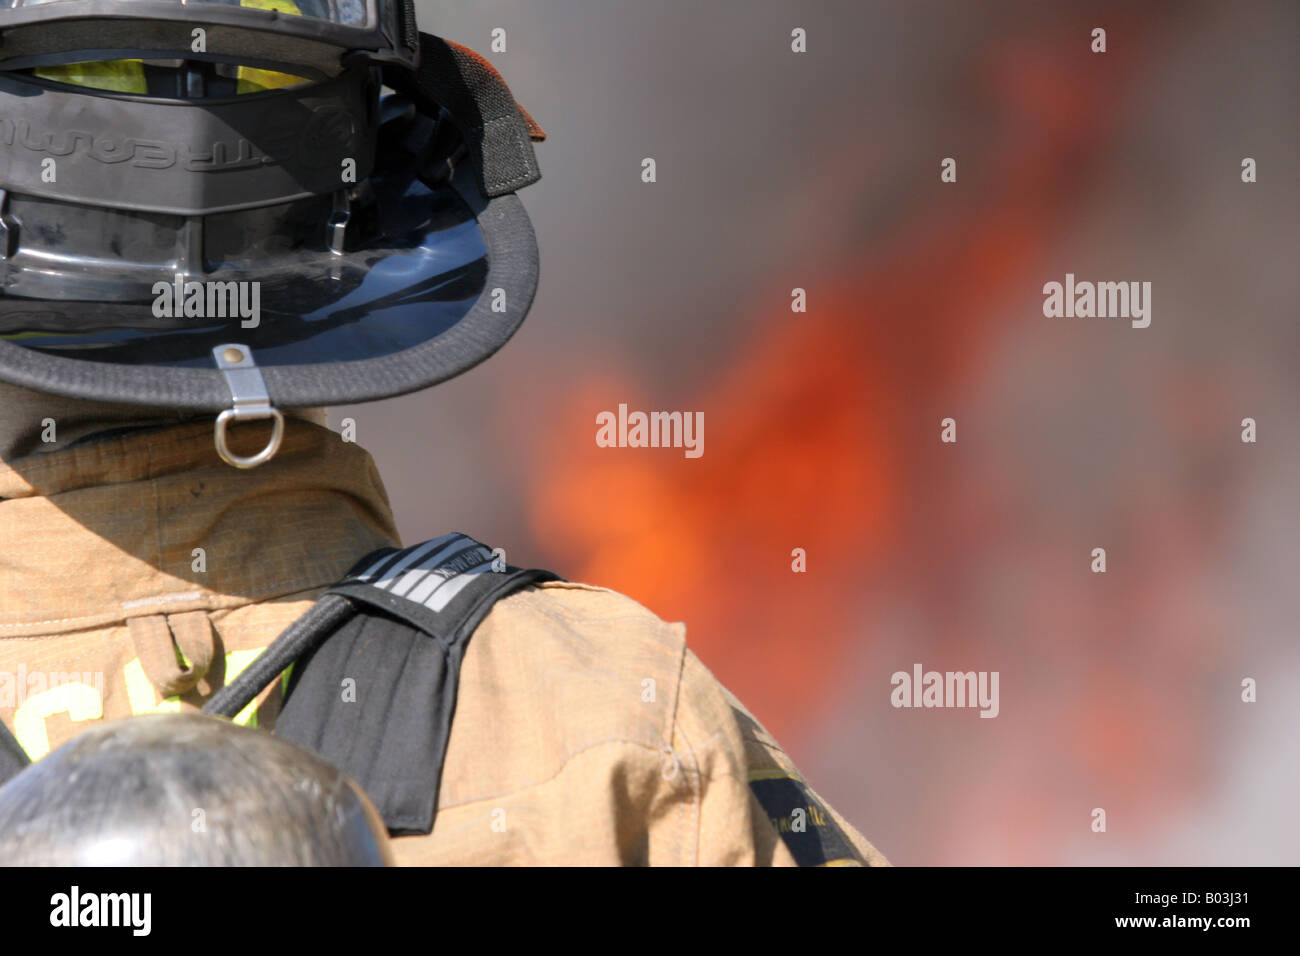 A firefighter attacking a fire in gear Stock Photo